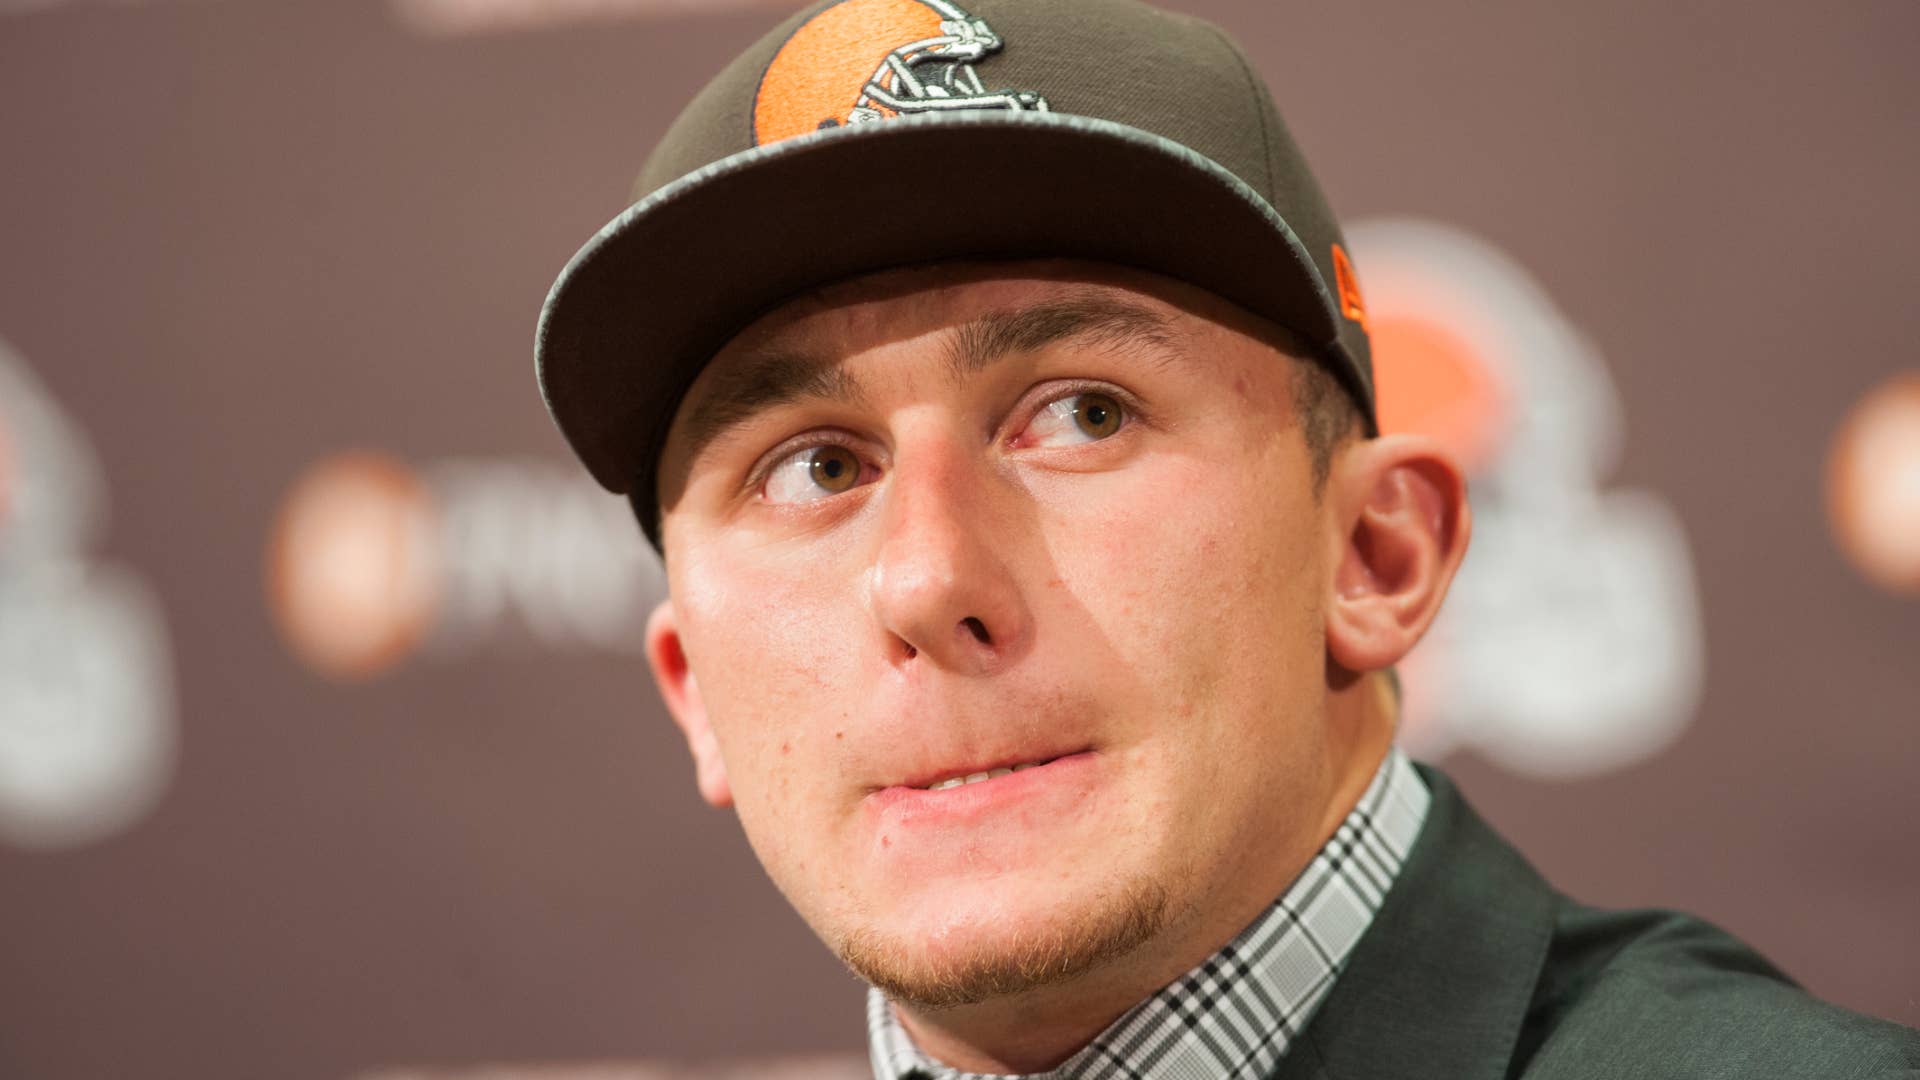 Johnny Manziel answers questions during press conference at Browns training facility.